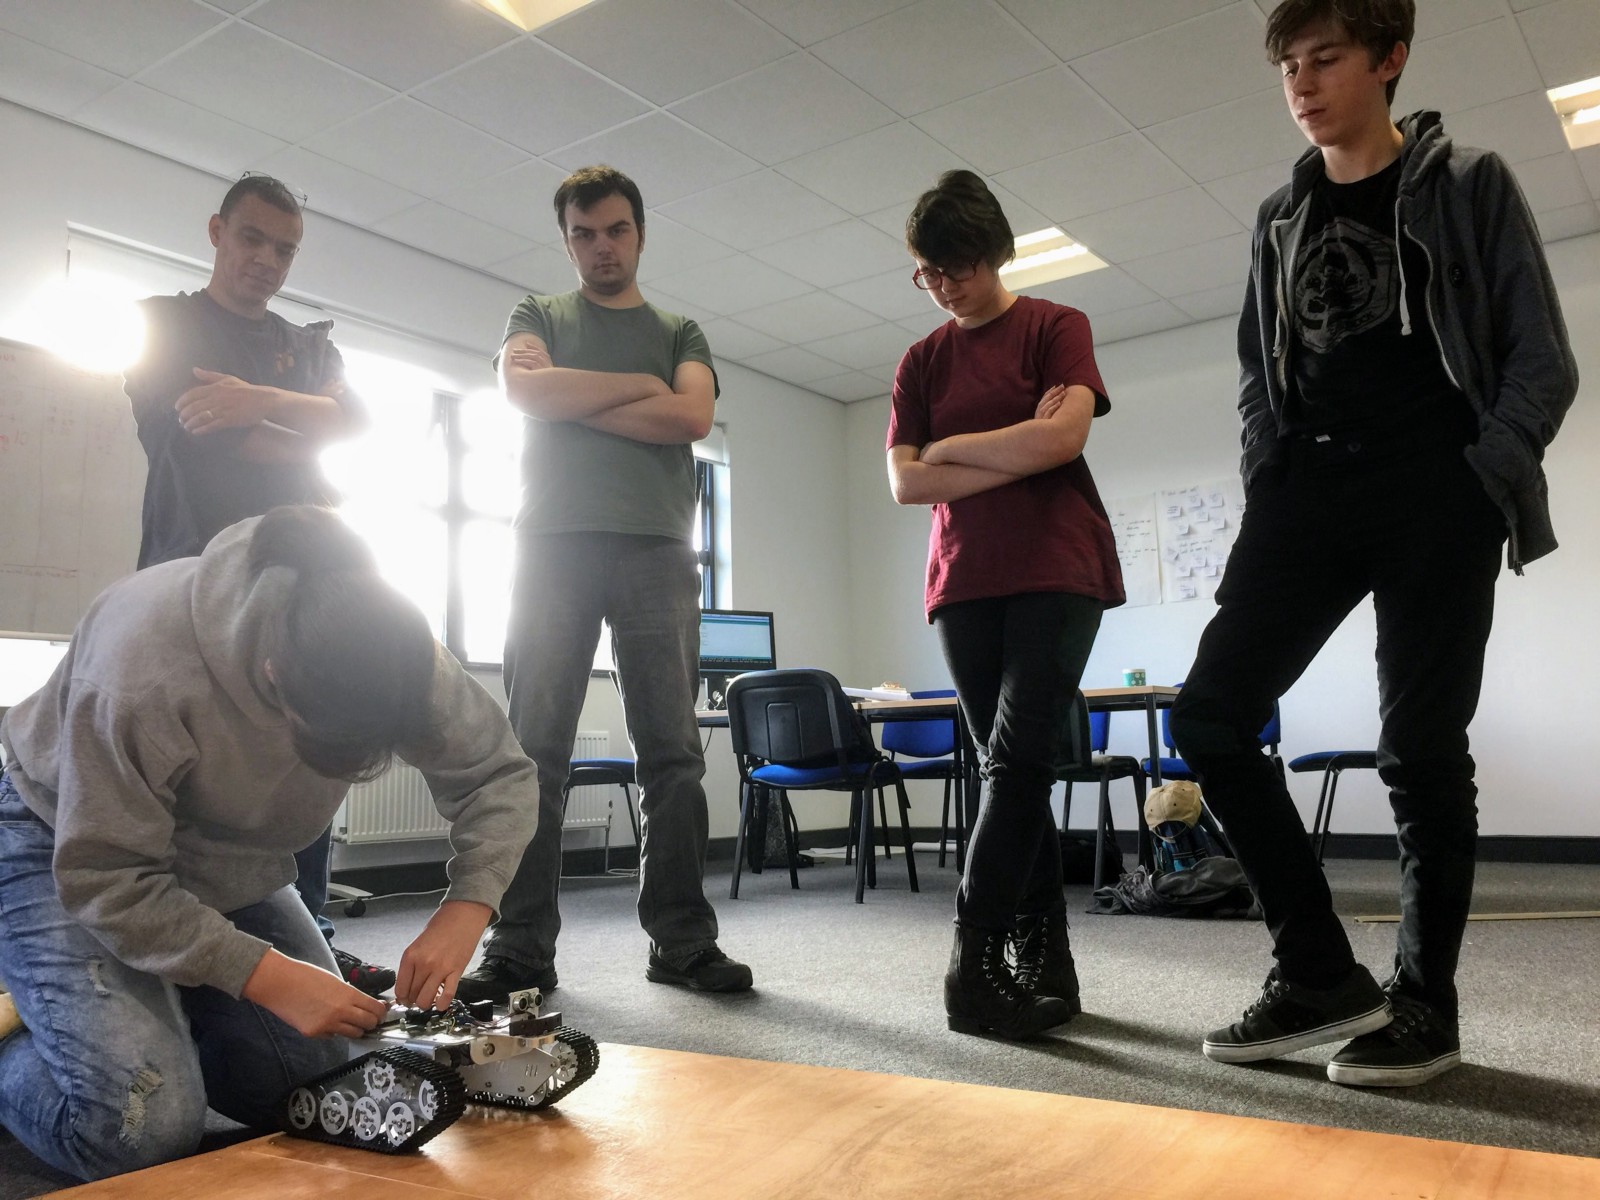 Team Indeciders test their code on the rover robots